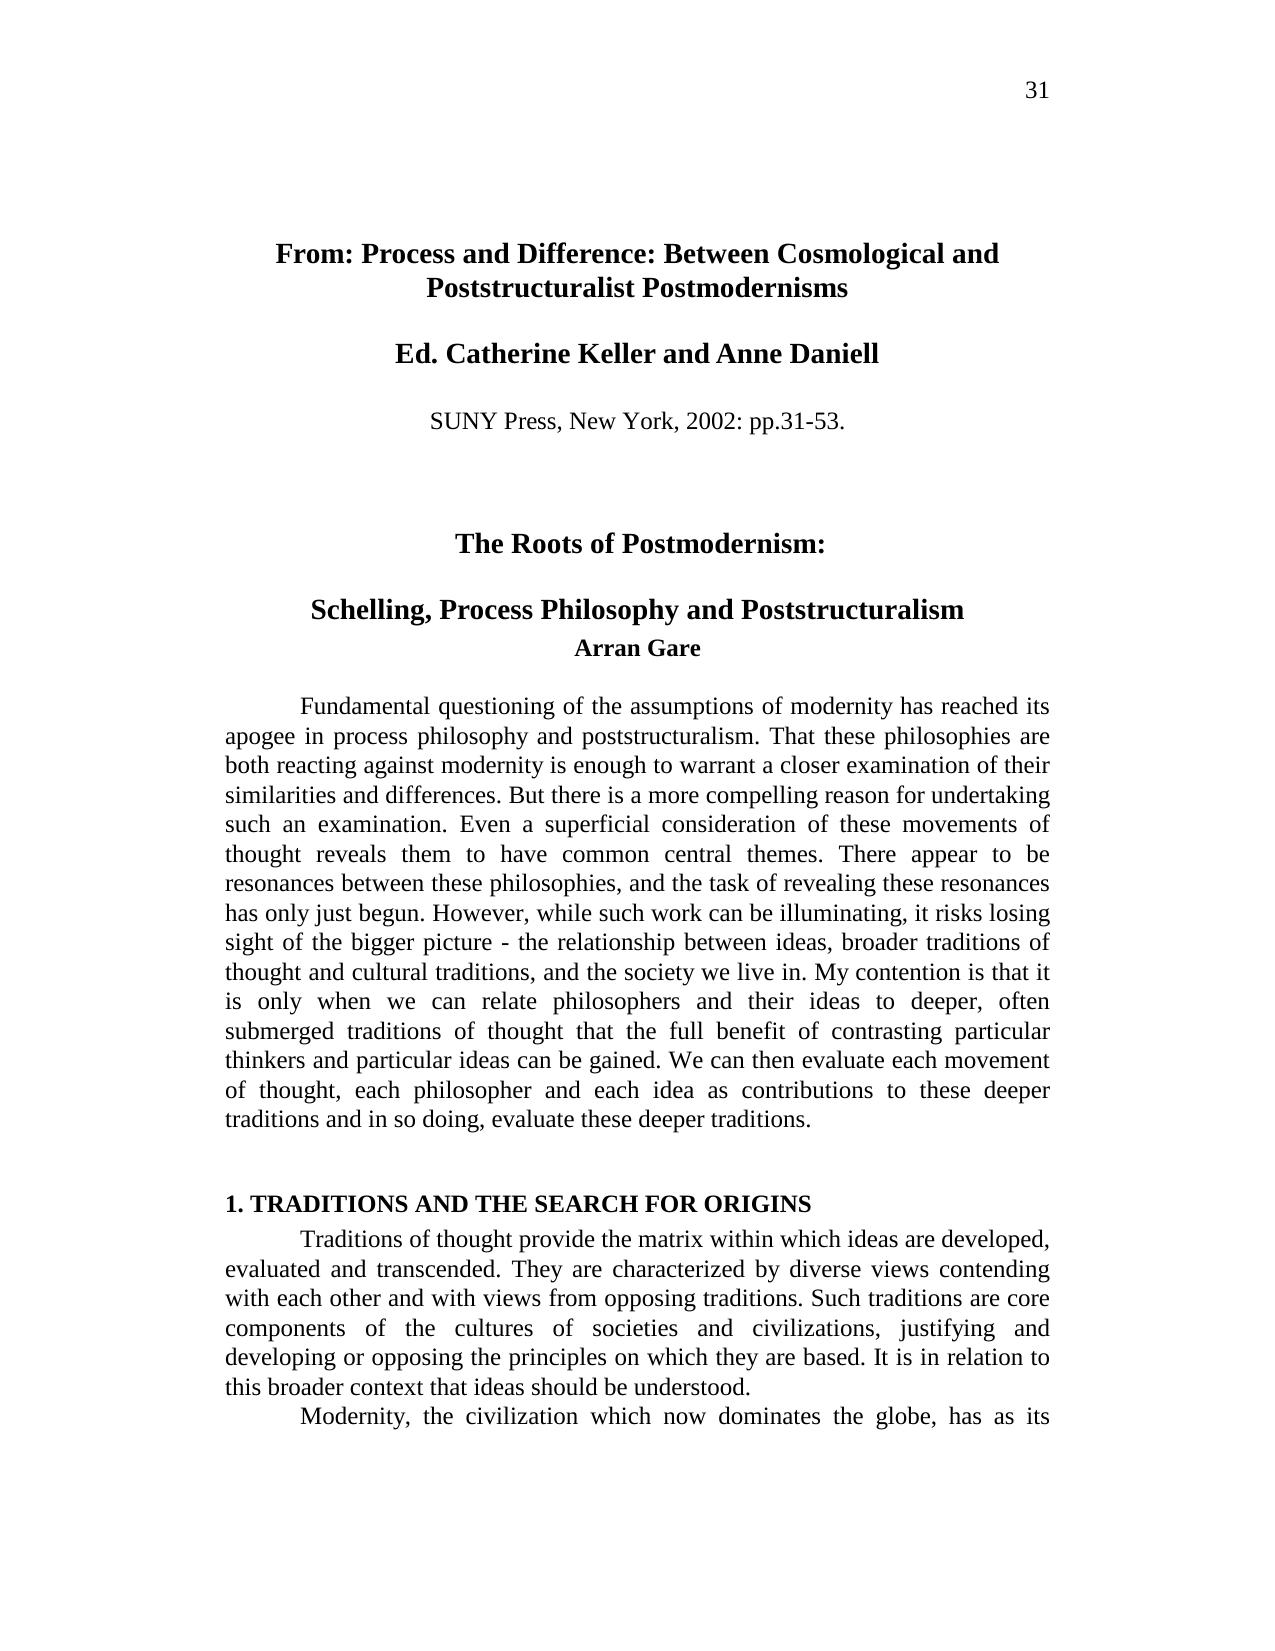 Process and Difference: Between Cosmological and  Poststructuralist Postmodernisms - Article